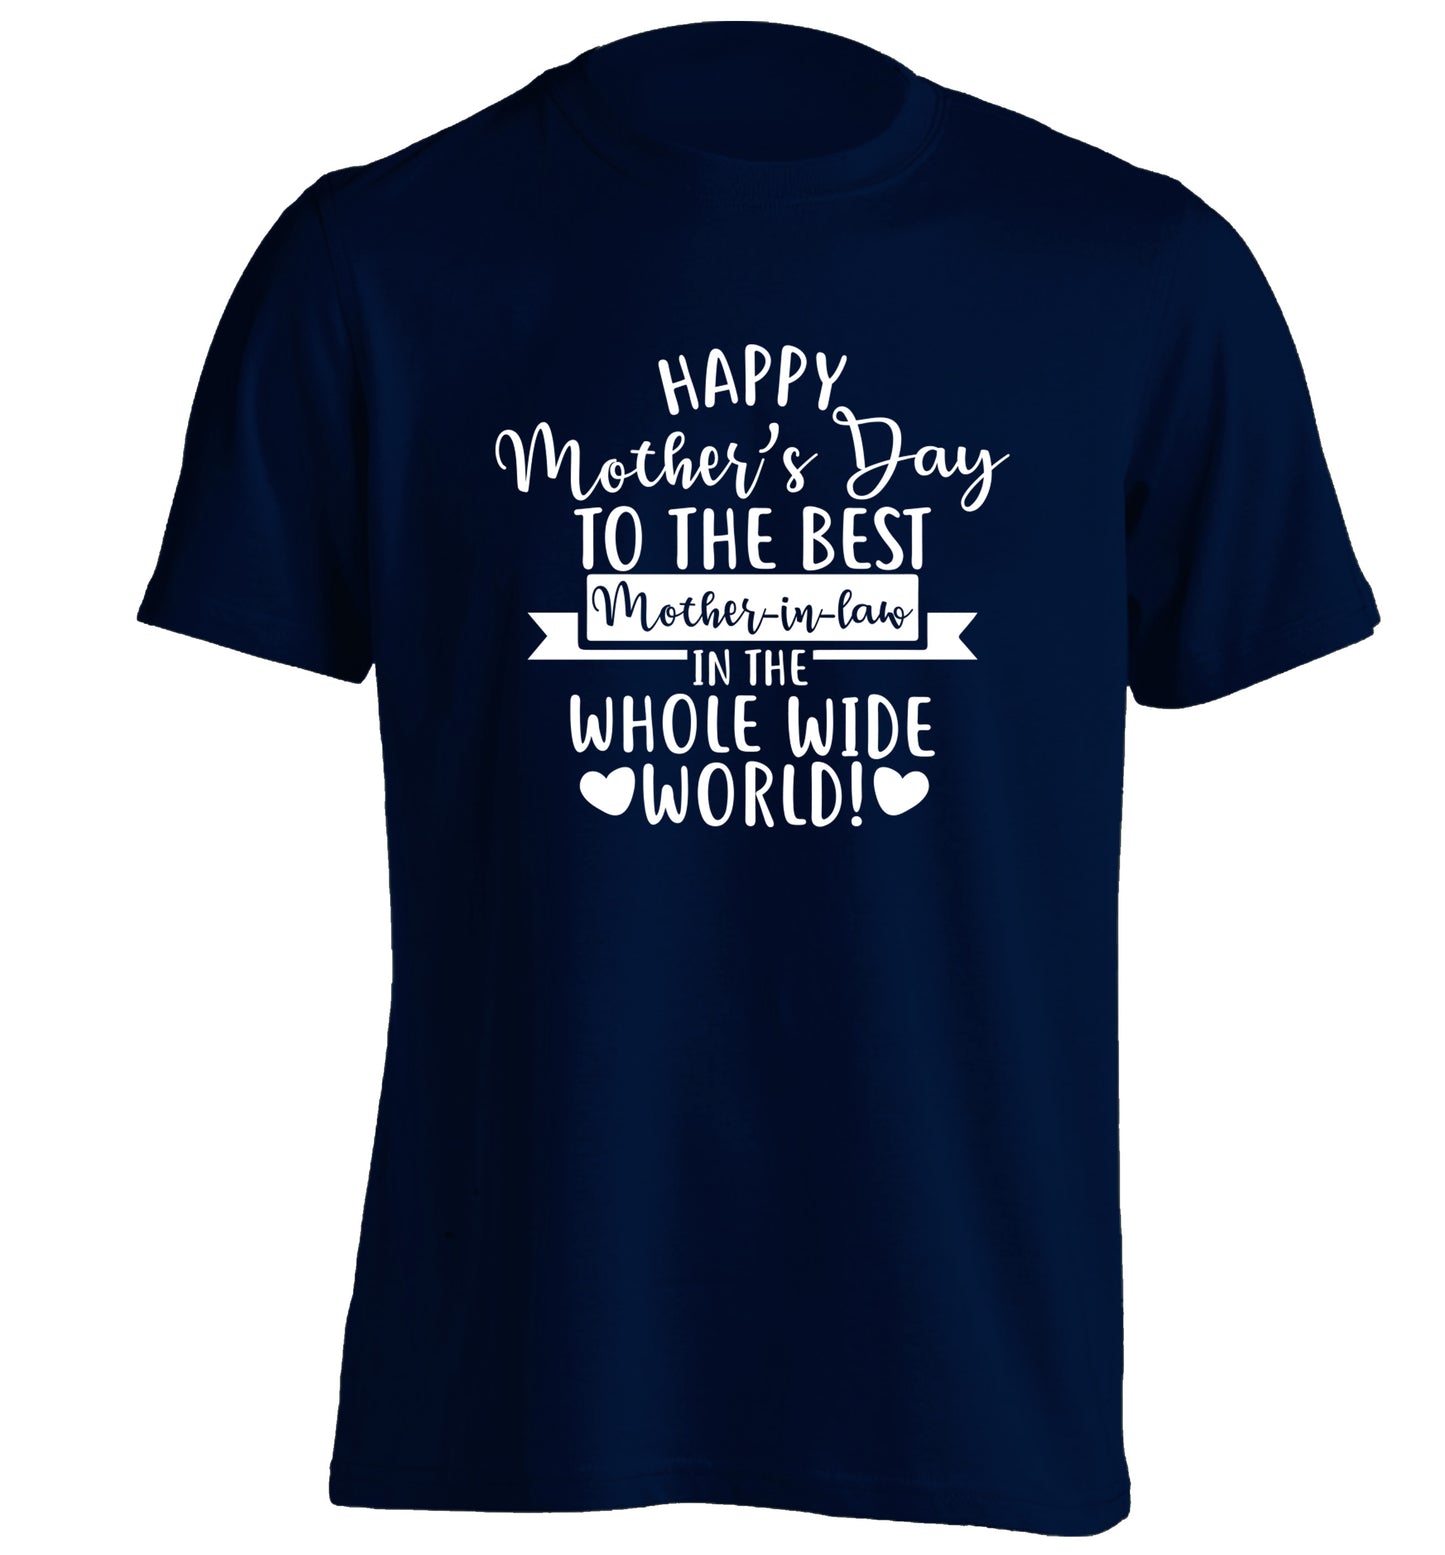 Happy mother's day to the best mother-in-law in the world adults unisex navy Tshirt 2XL